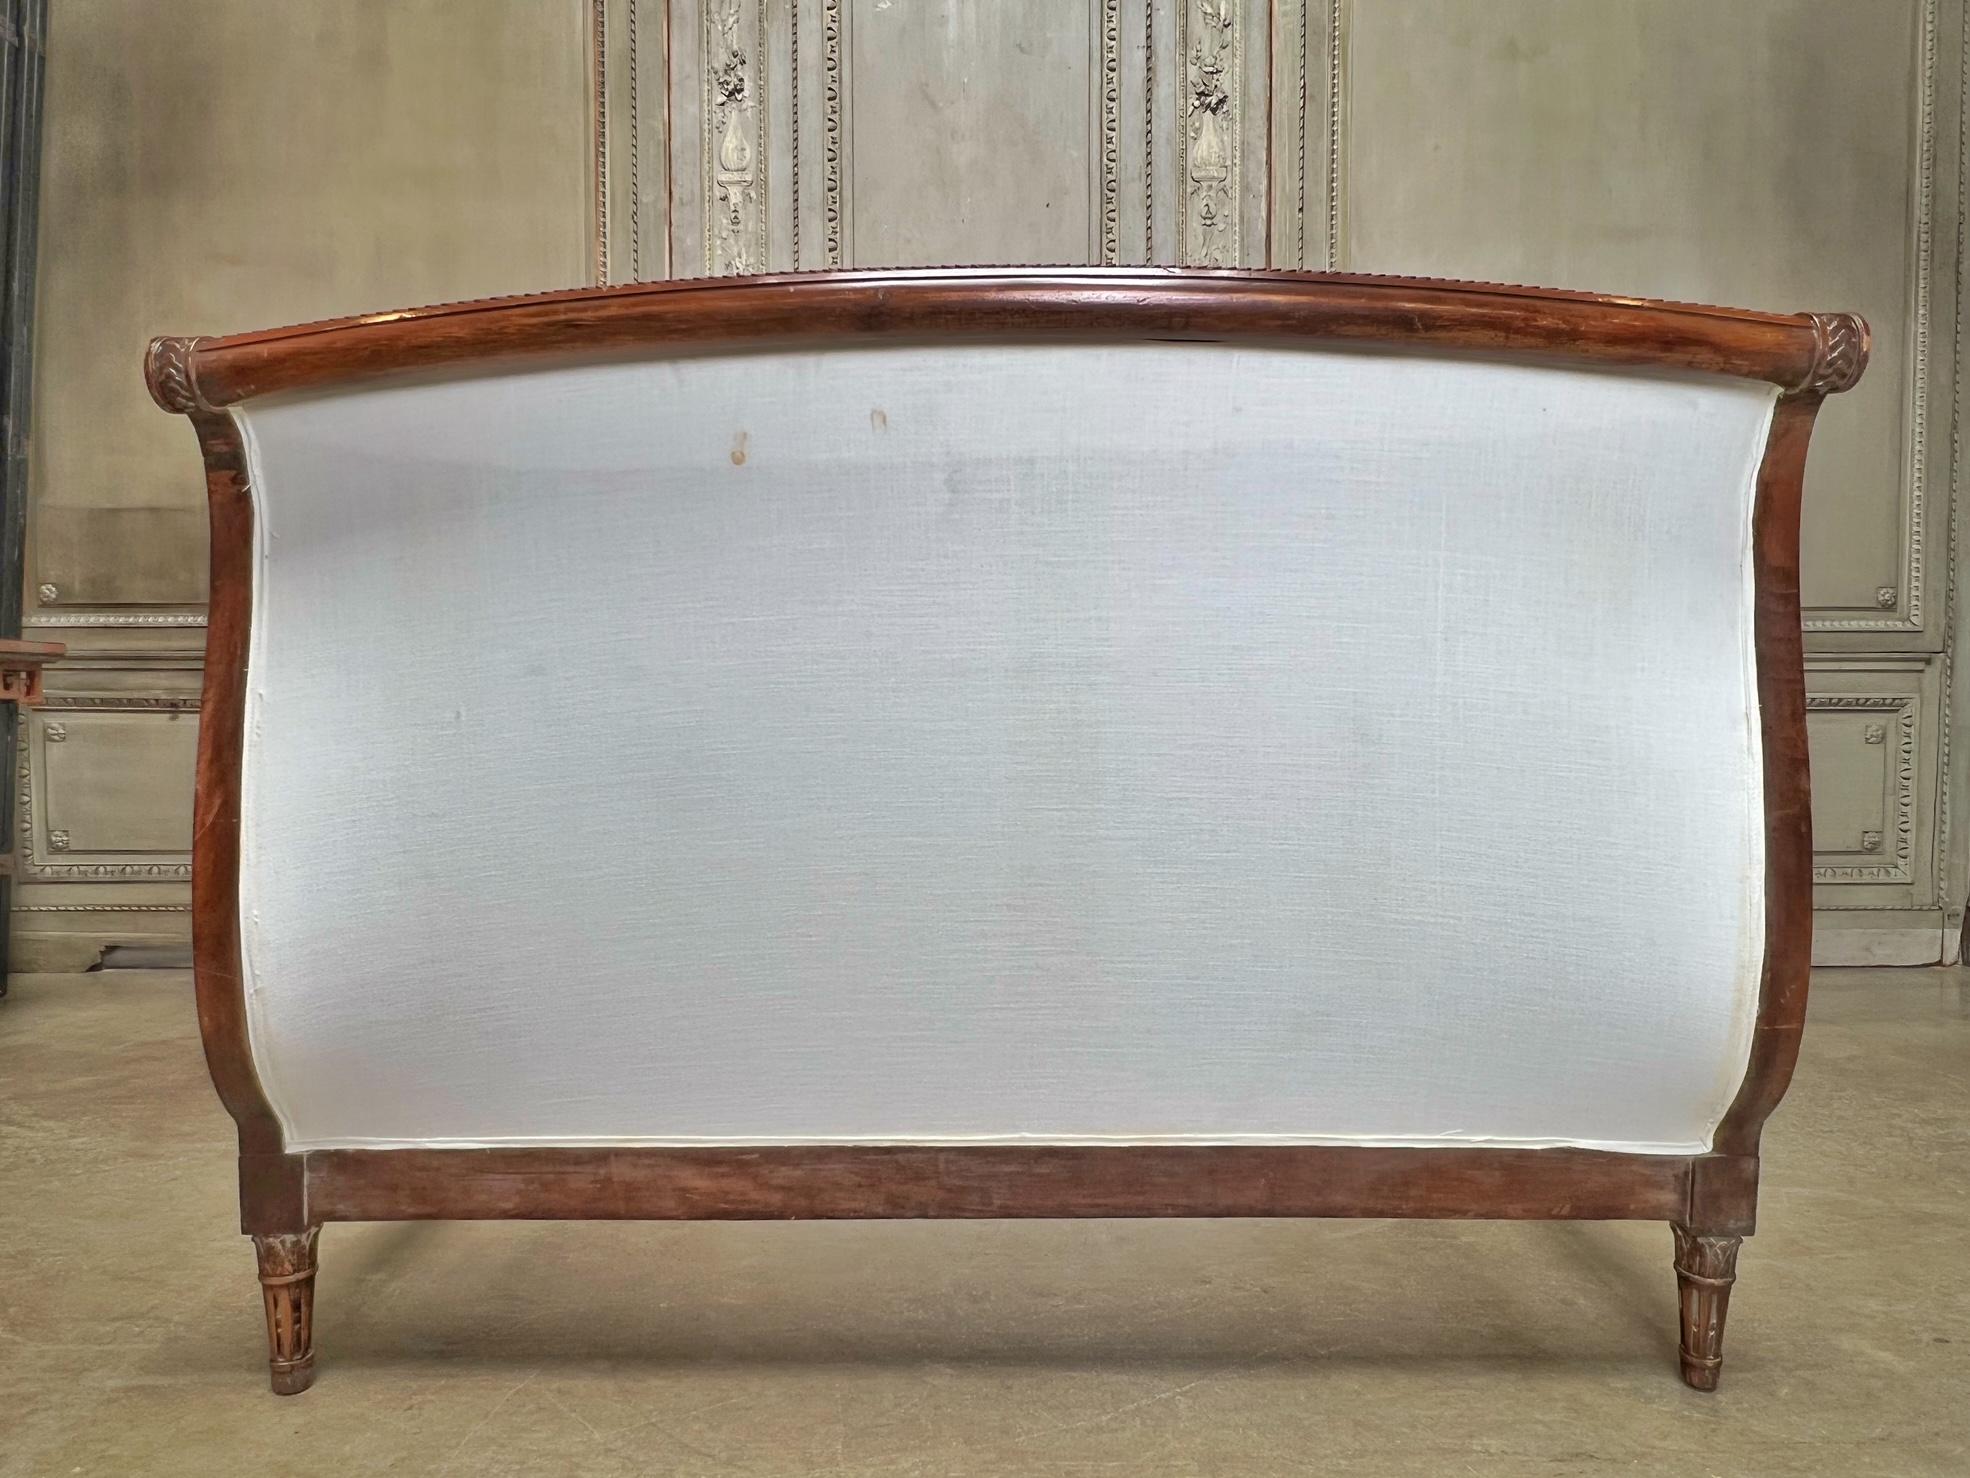 19th Century French Louis XVI Style Carved Wood Bed